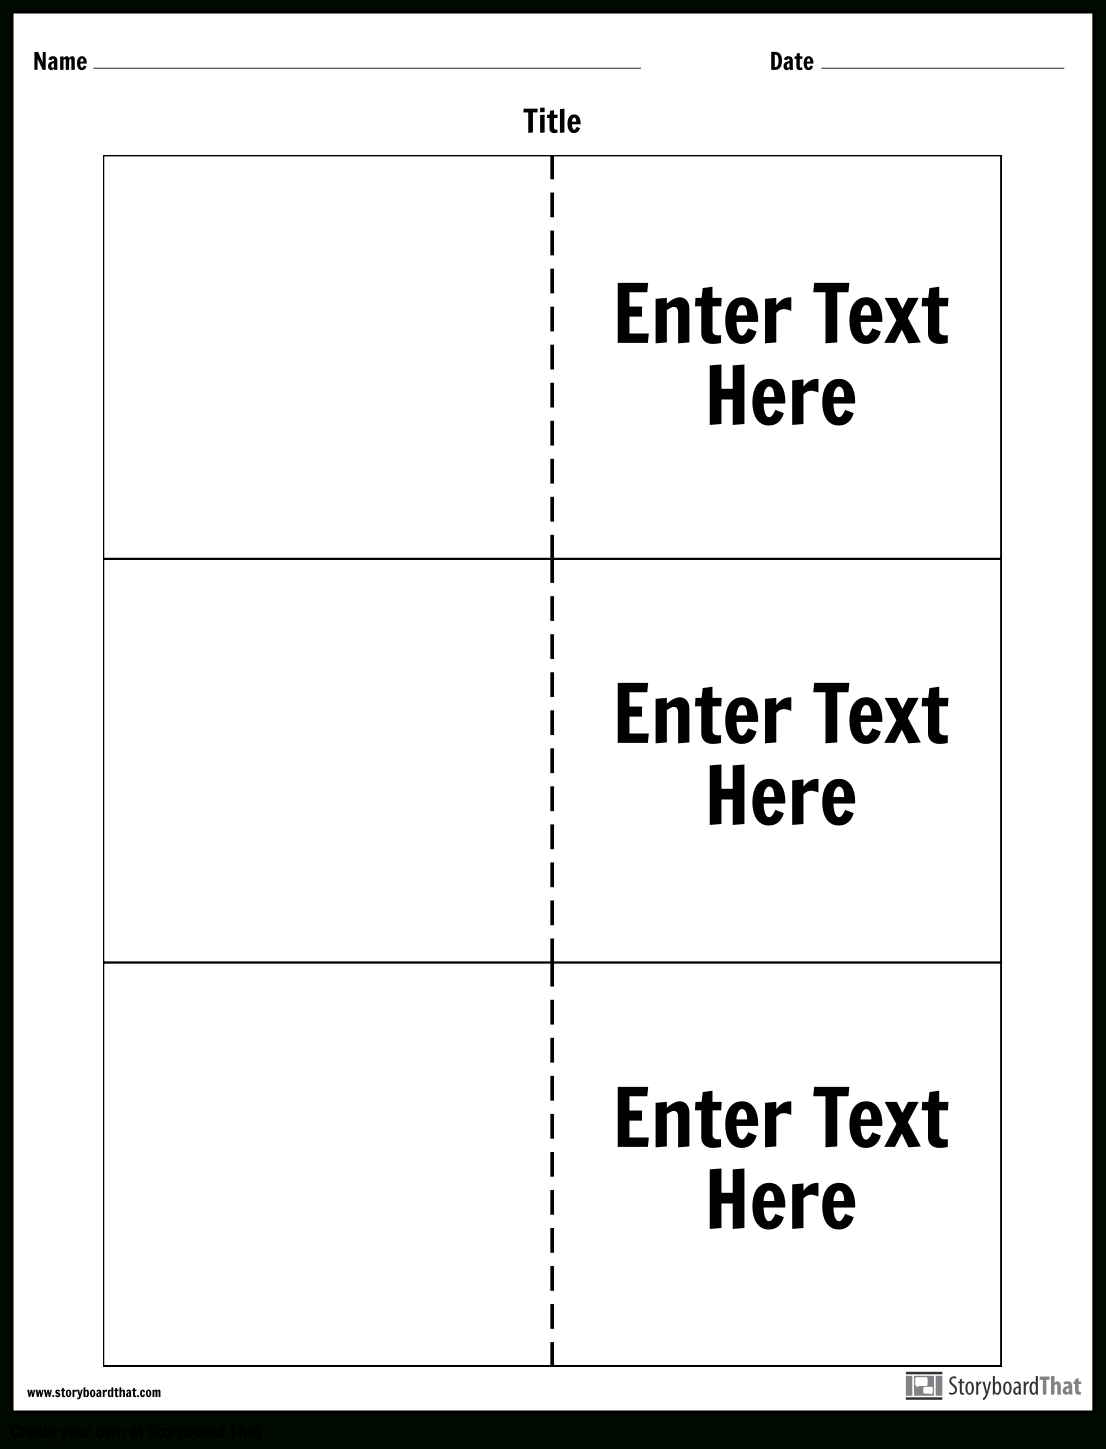 Make Printable Flashcards | Flashcard Templates In Word Cue Card Template